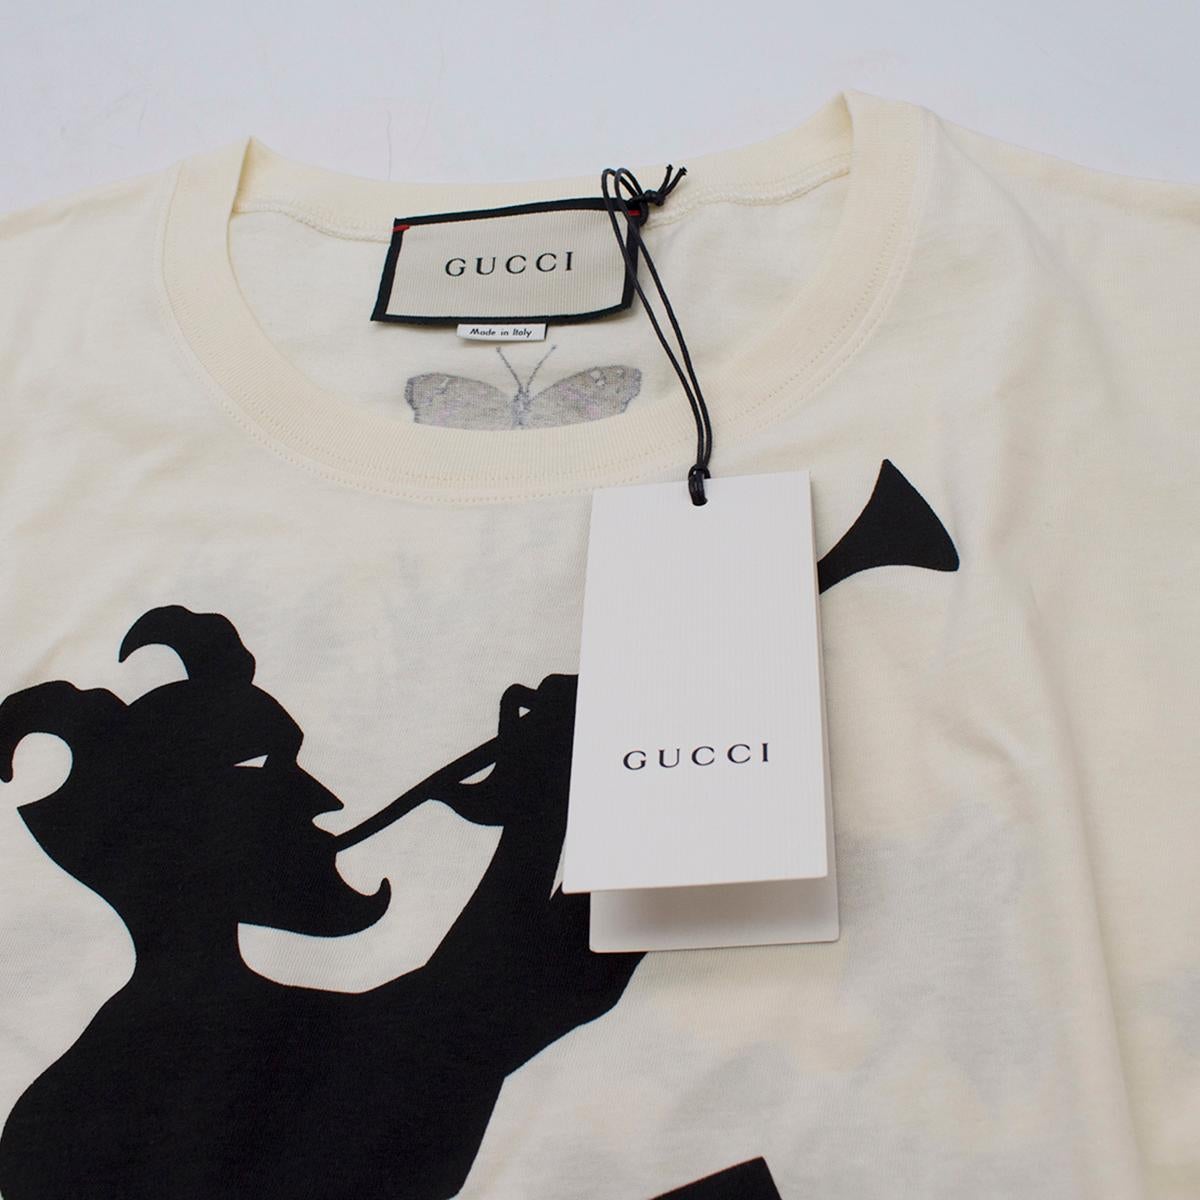 Women's Gucci Runway Chateau Marmont T-shirt - New Season US 4 For Sale